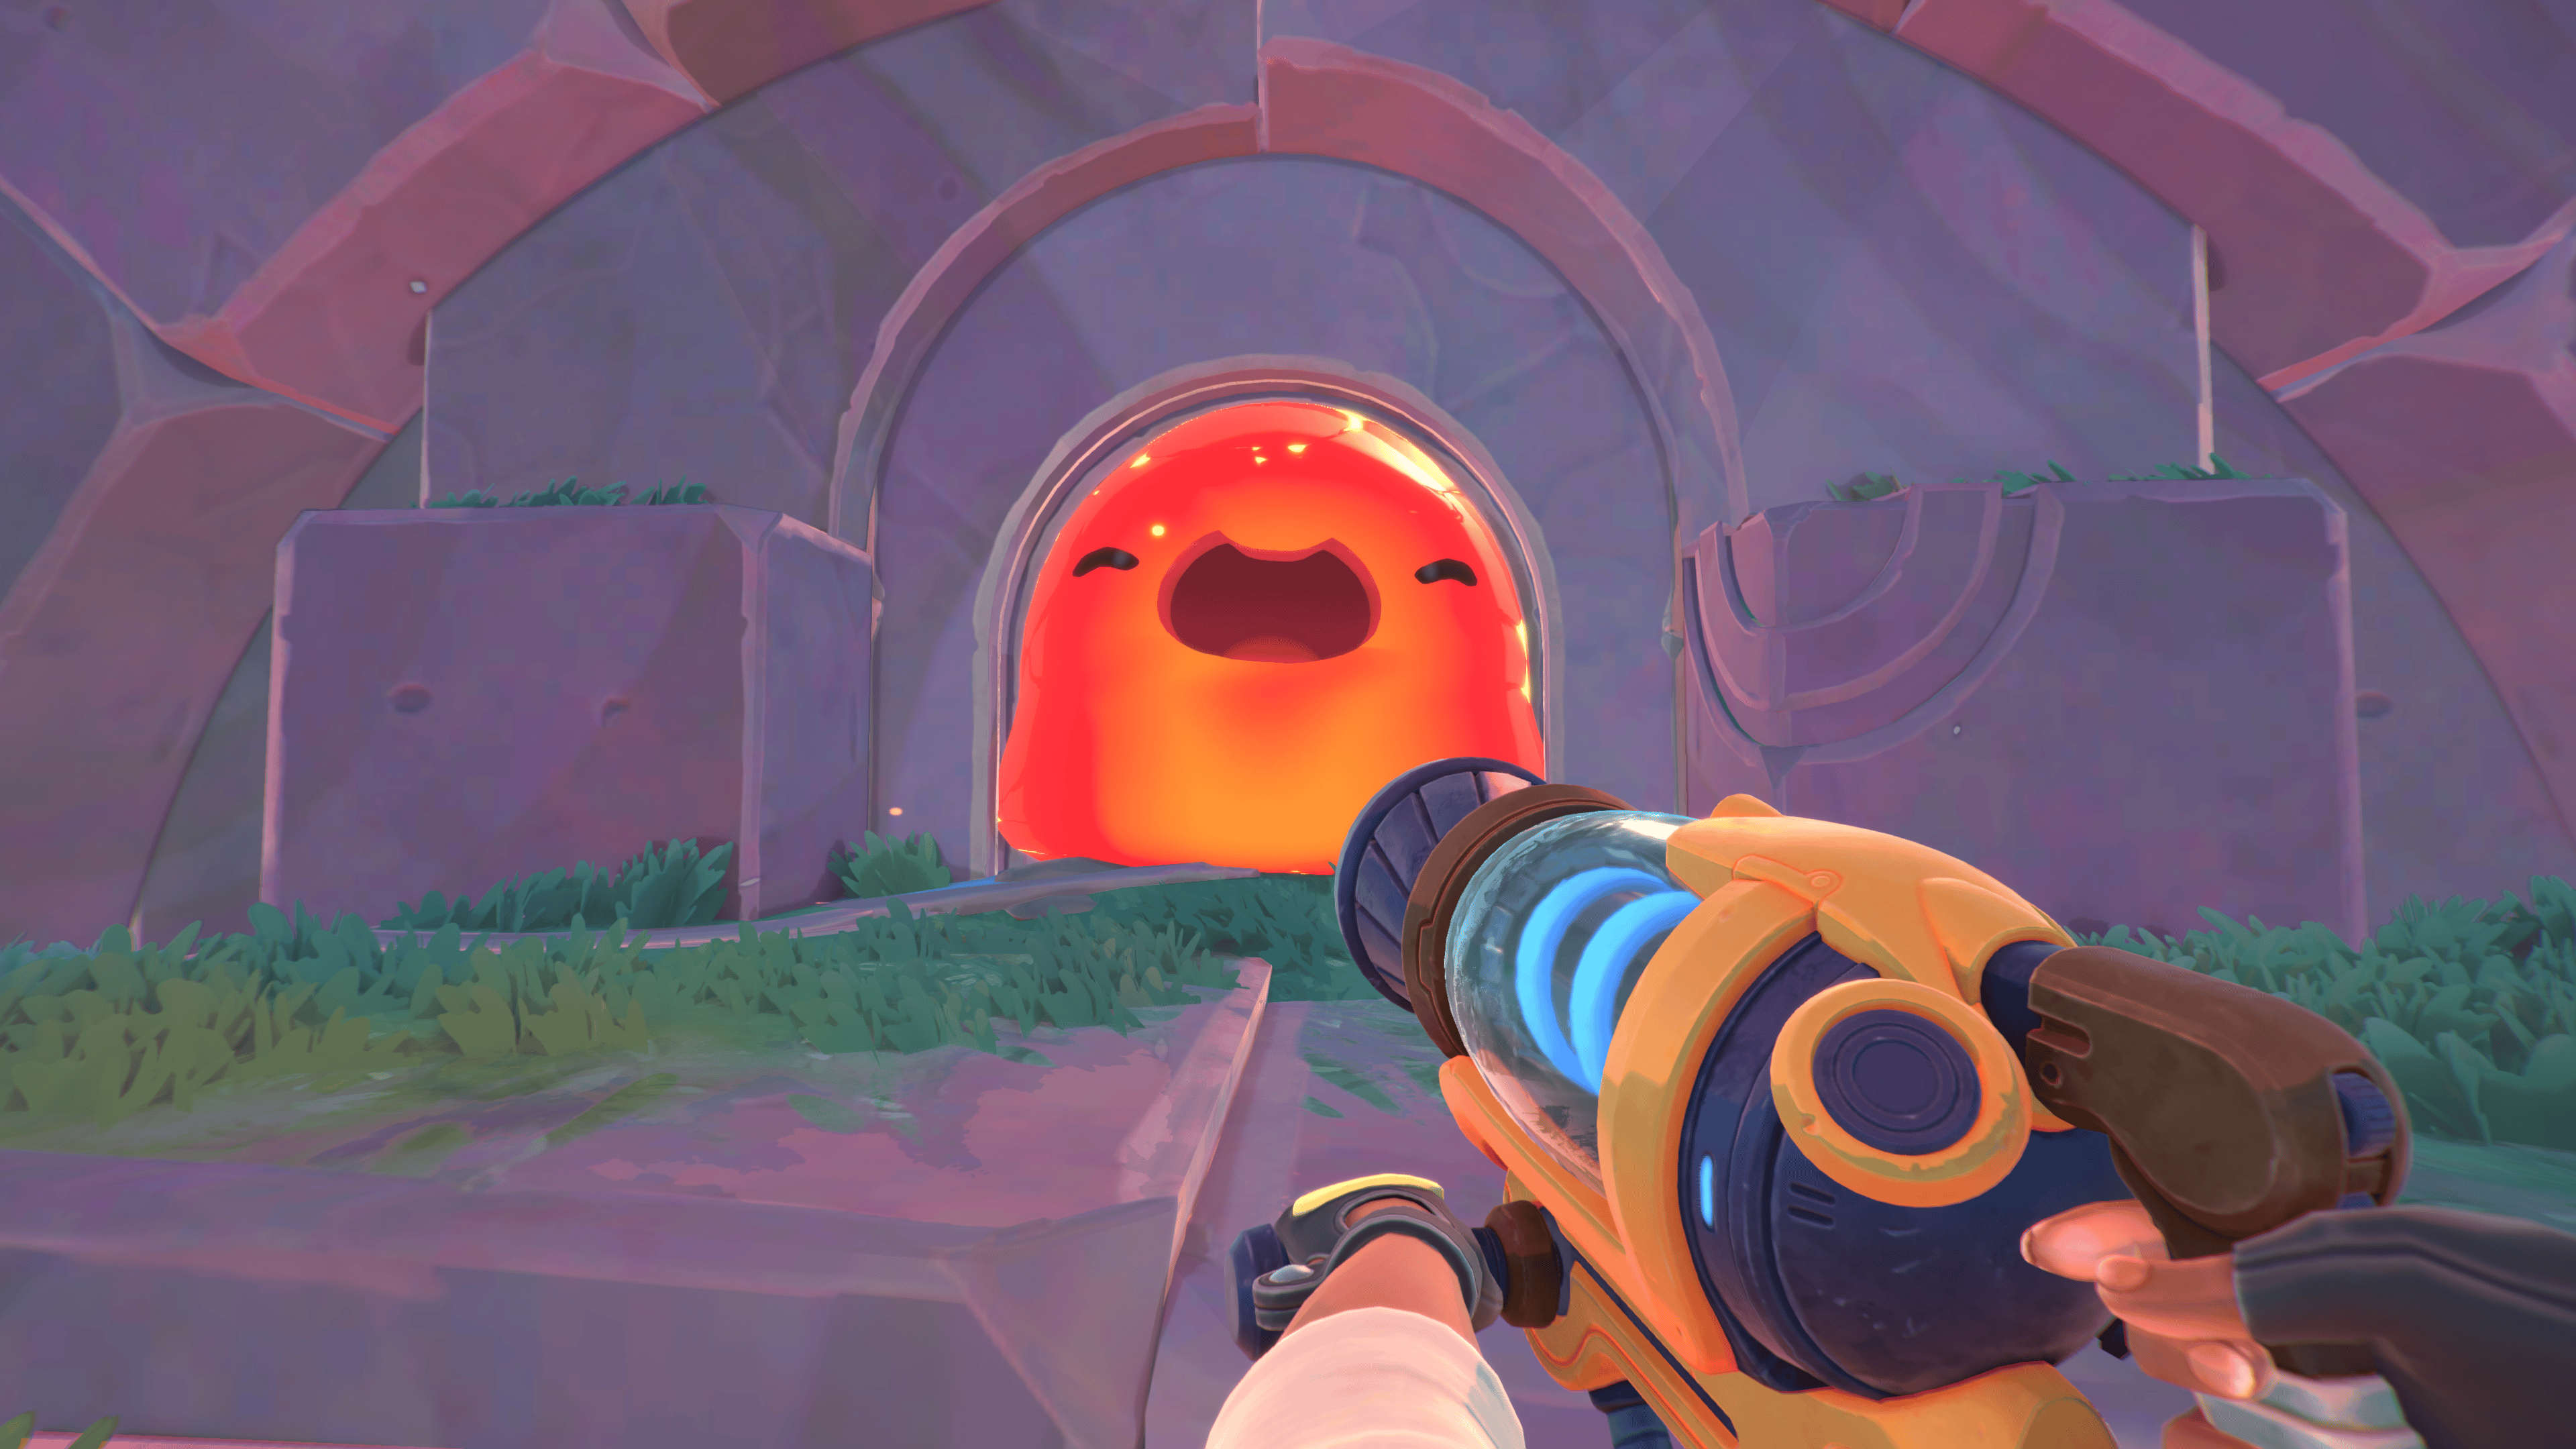 What Does the Boom Gordo Unlock in Slime Rancher 2?